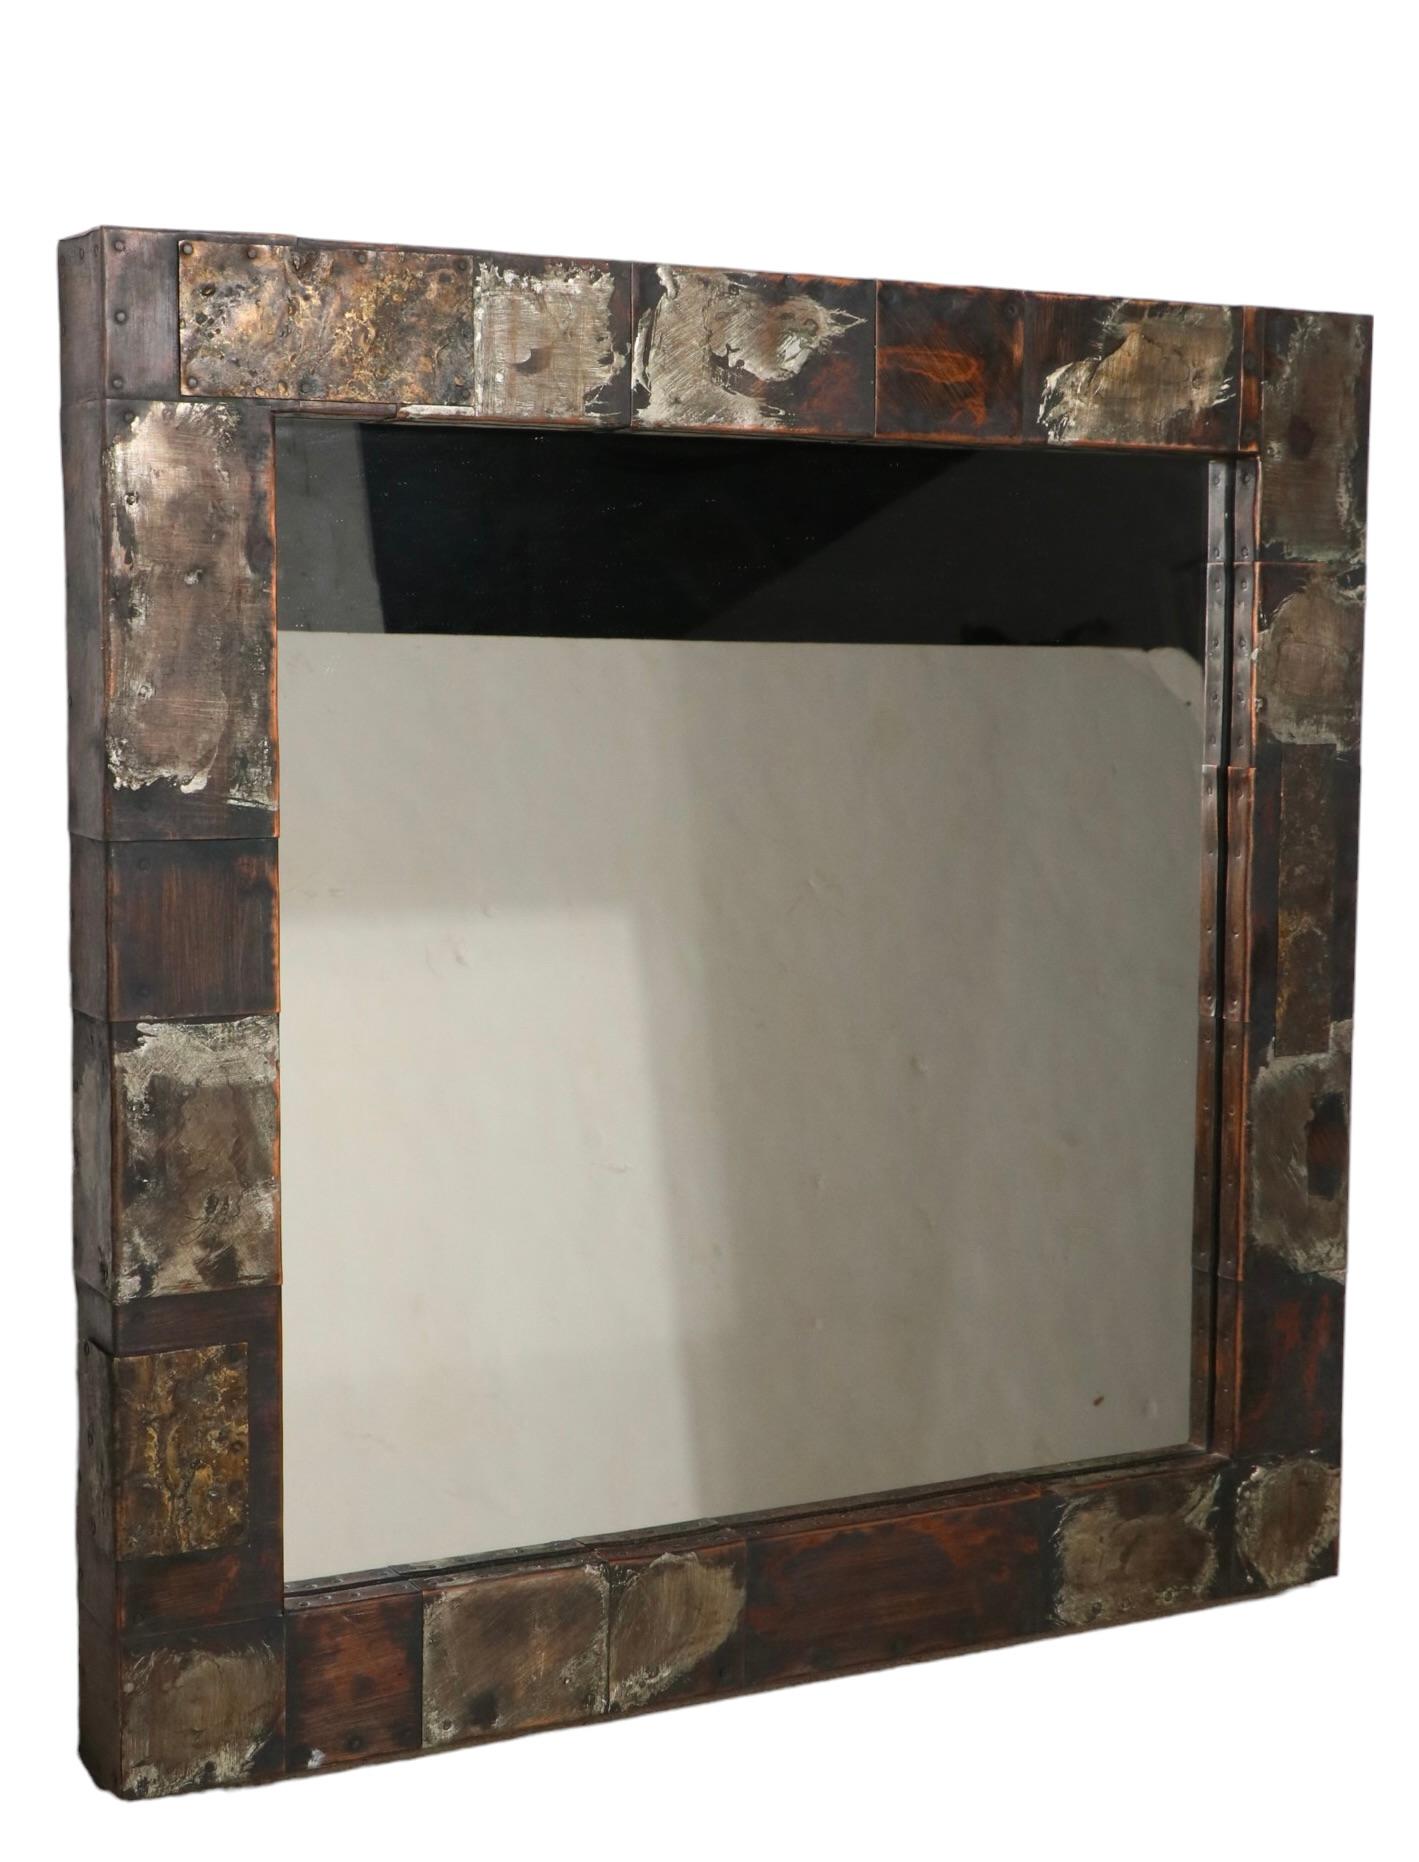 Brass Extra Long Brutalist Wall Mount Shelf and Matching Wall Mirror by Paul Evans For Sale